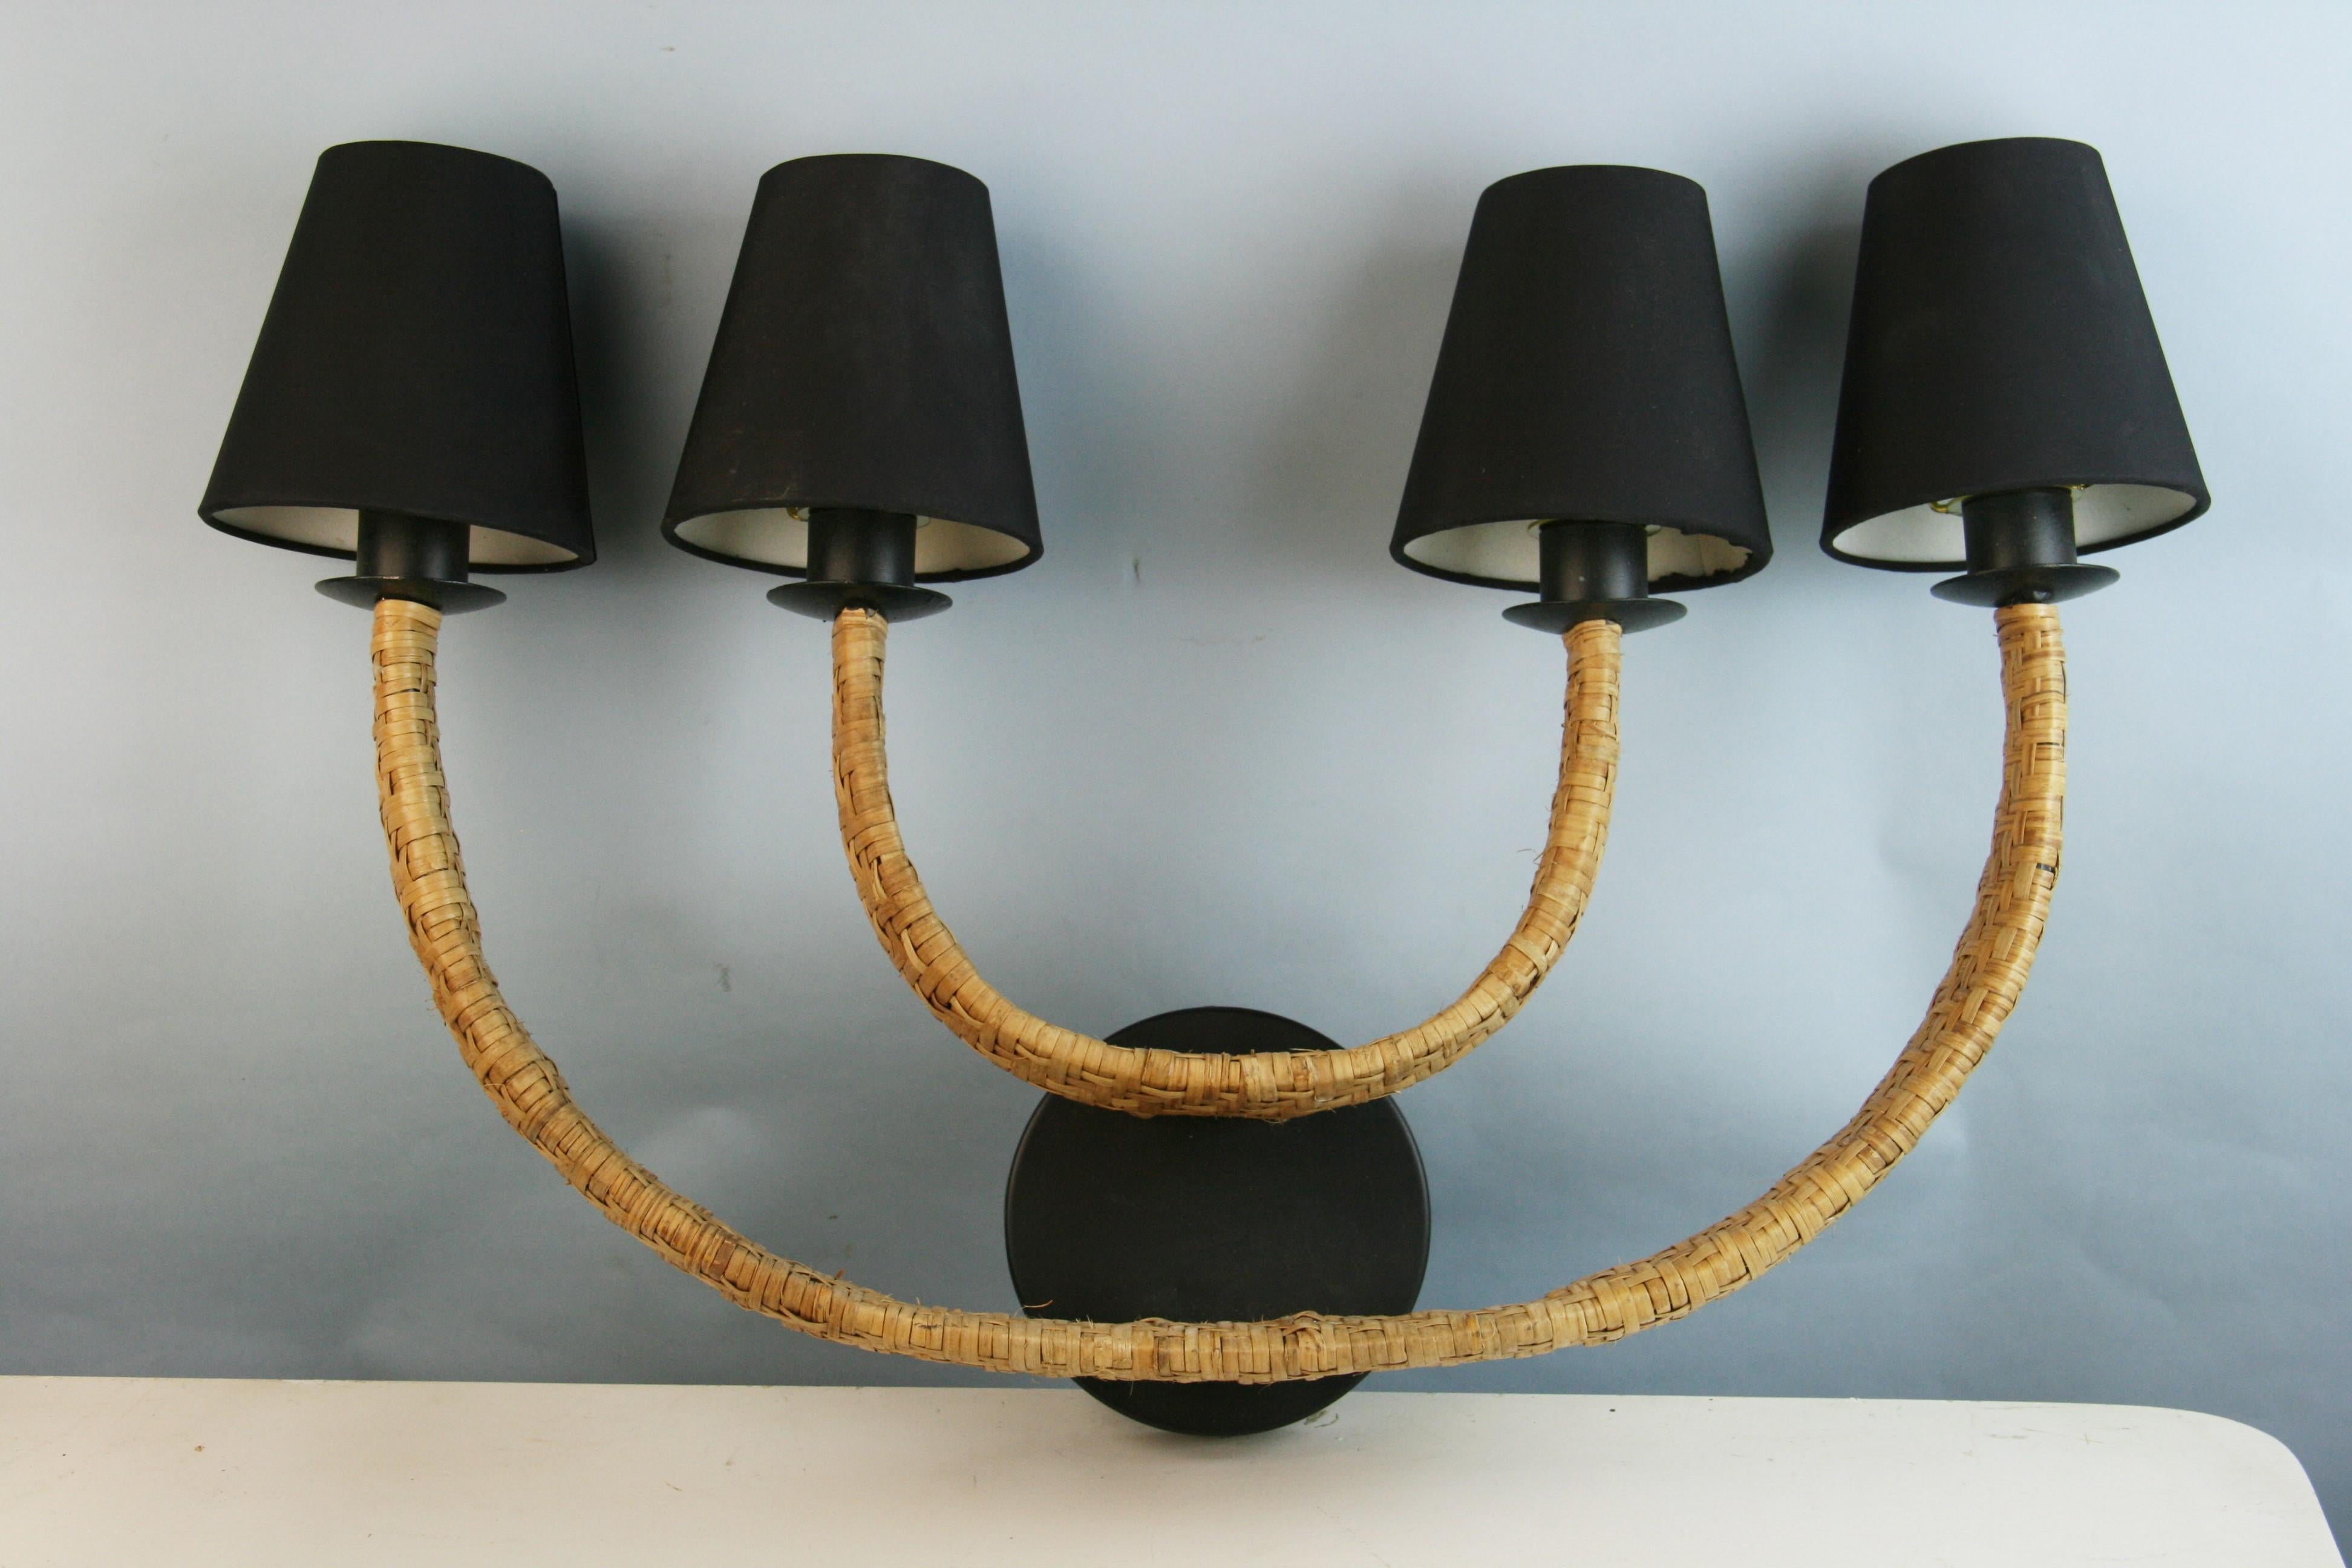 3-1096 Pair 4 light French metal and wicker sconces with black shades
Takes 40 watt candelabra based bulbs 
Rewired.